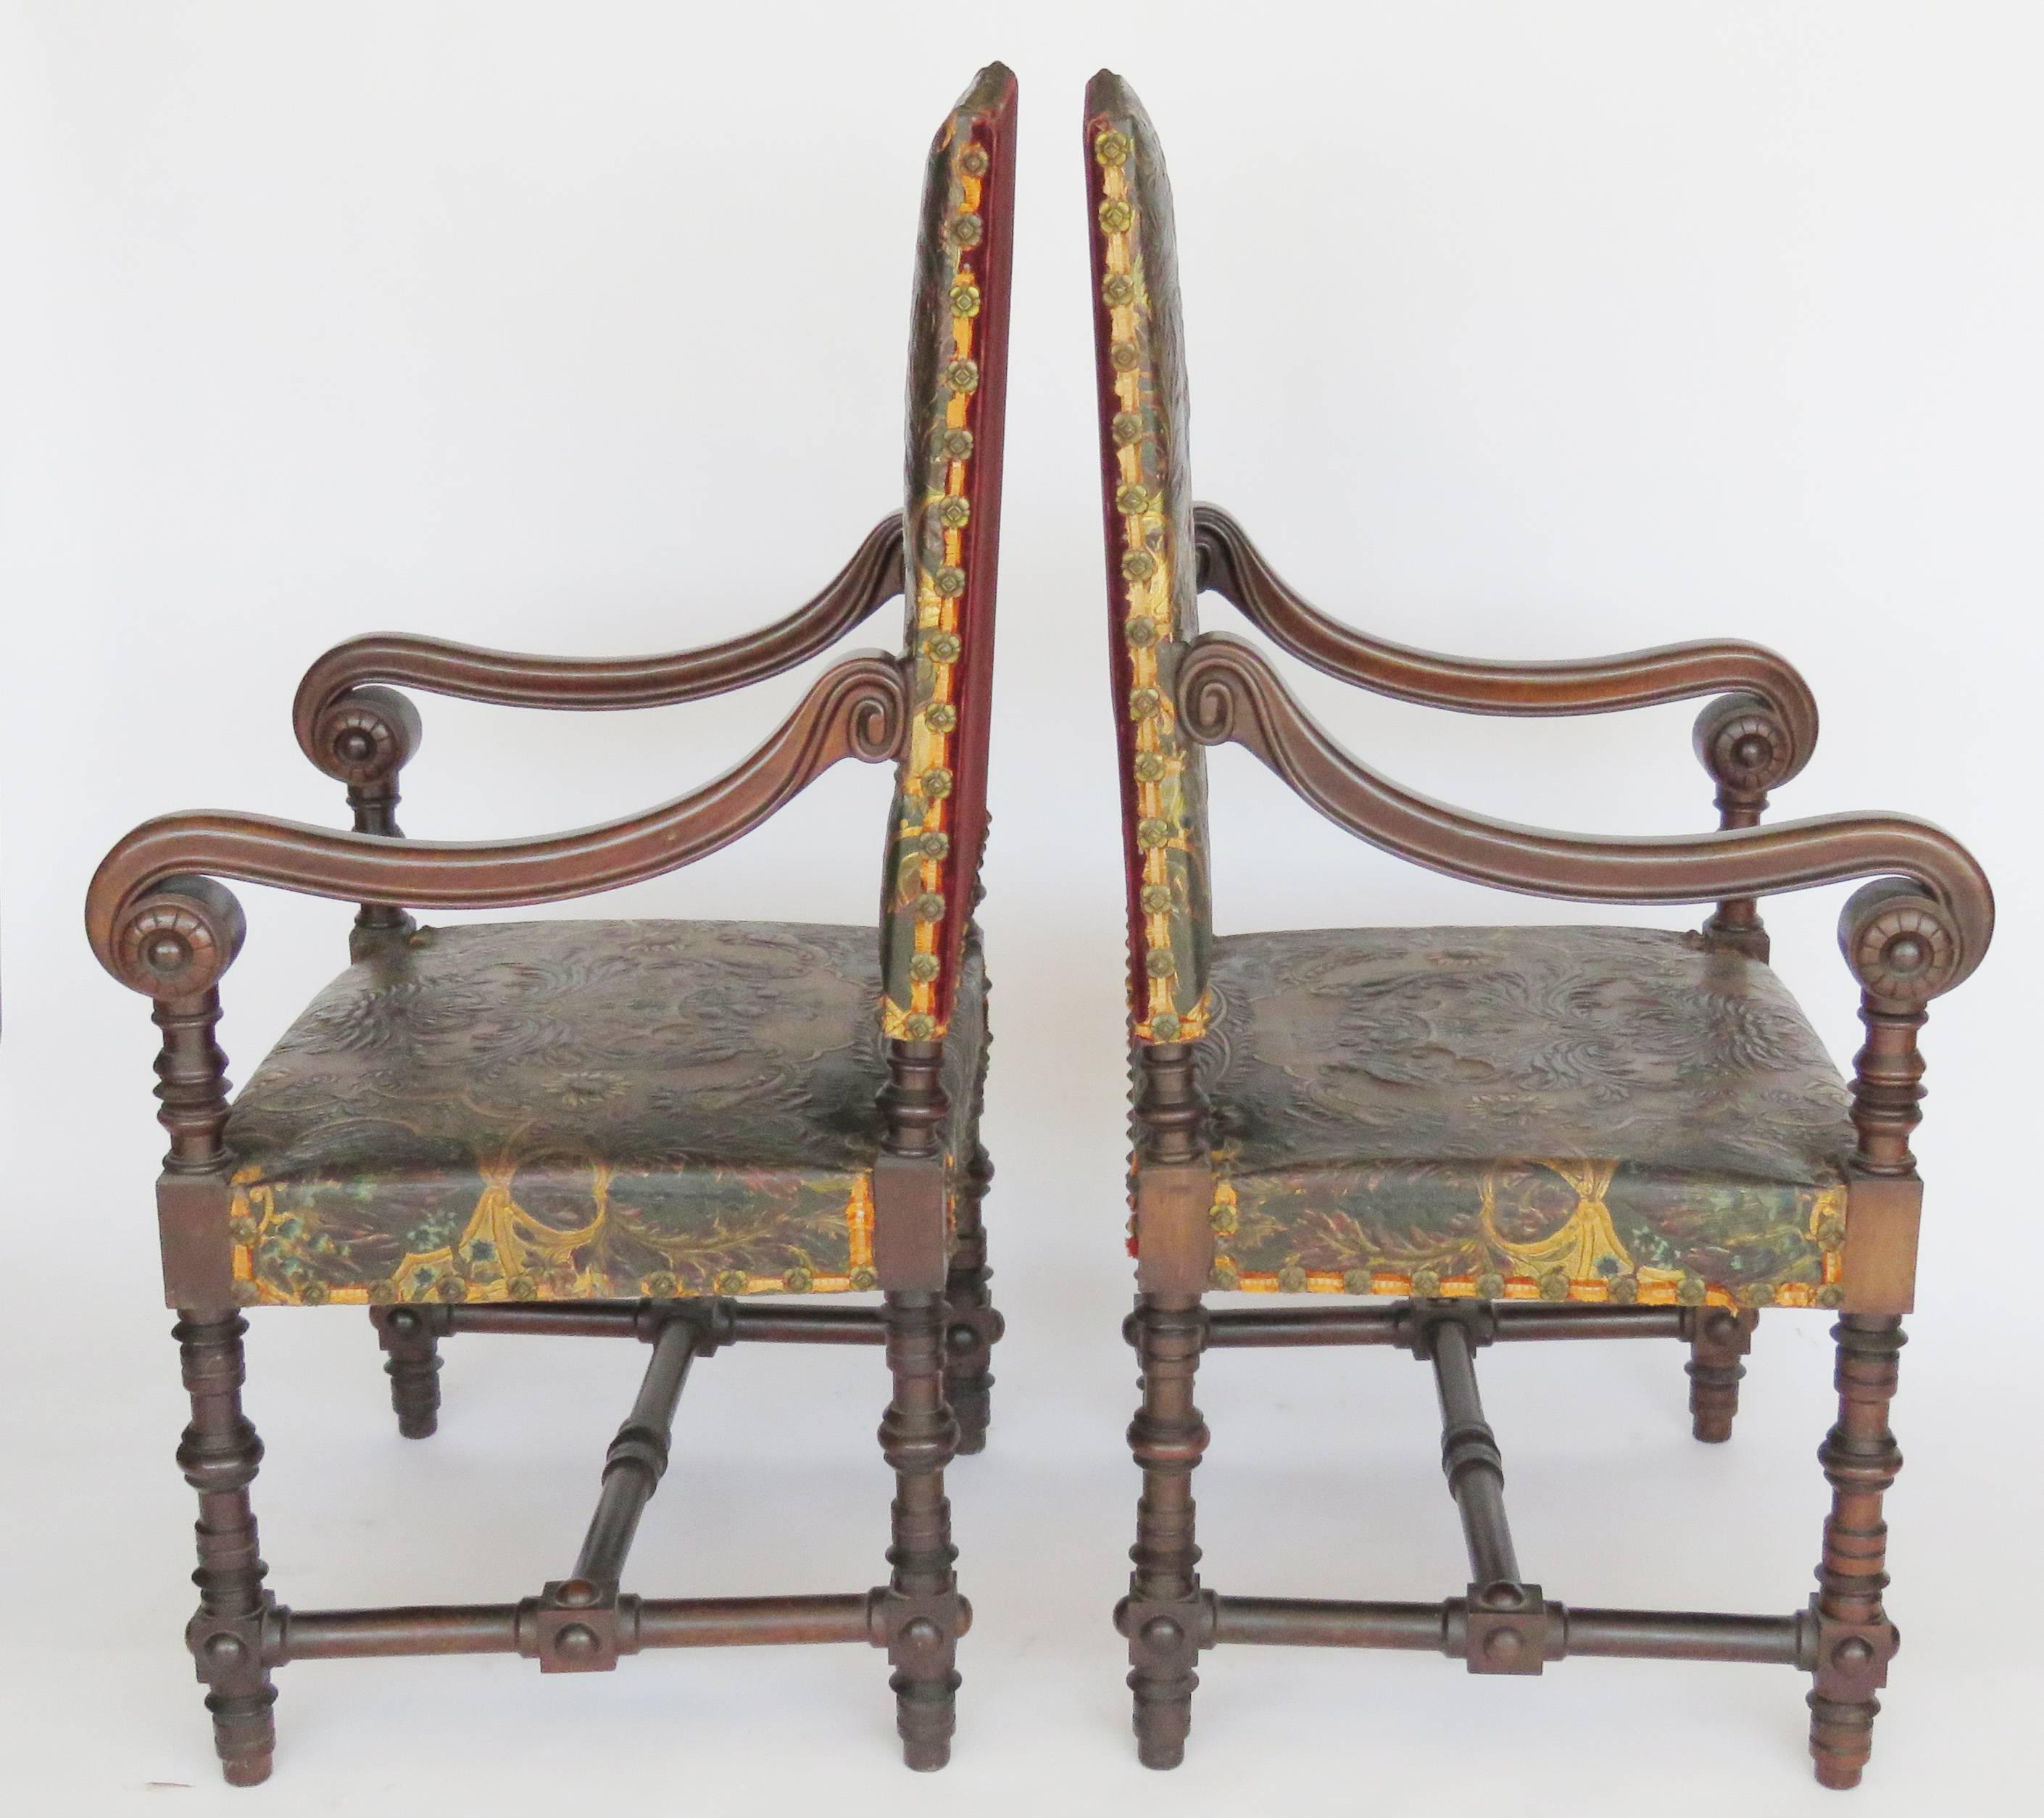 Rectangular Guadameci gilt and green tooled leather backrests with extensive decoration of foliage and parrakeets, similar seats mounted with brass buttons, downward curving armrests ending in incurving scrolls raised on baluster turned legs joined